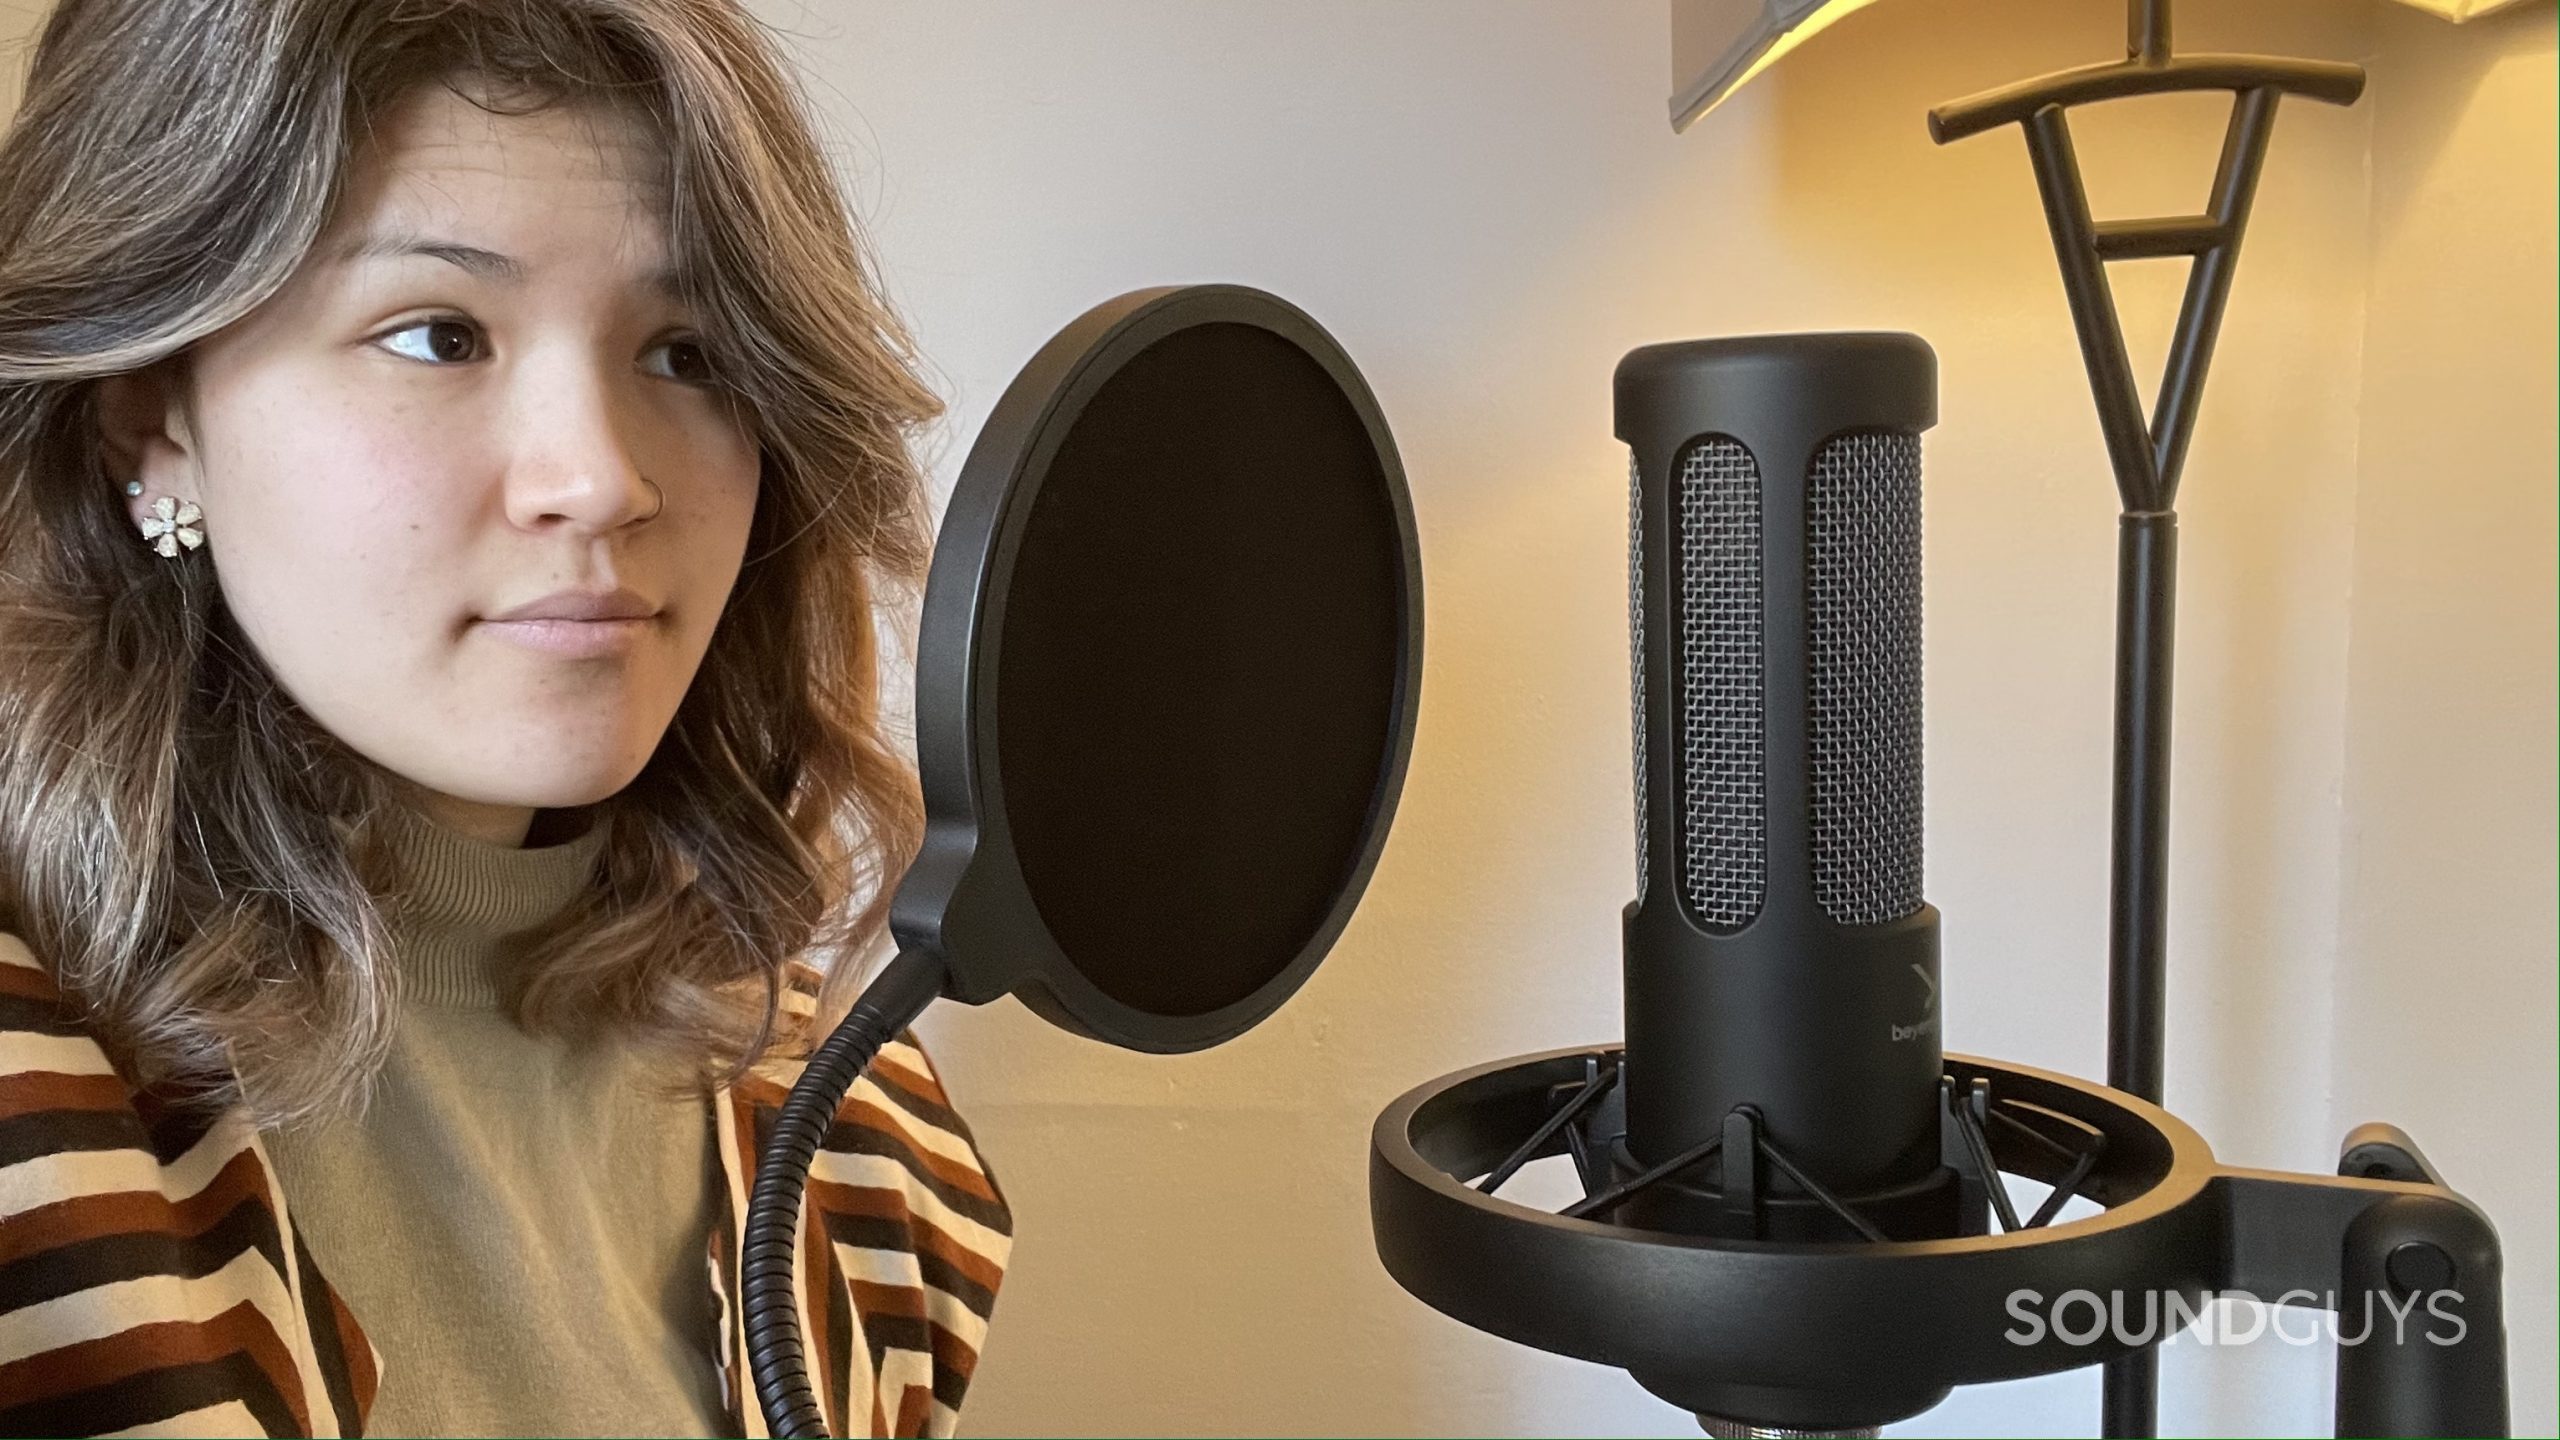 5 Top Microphones for Voice Over Recording Compared